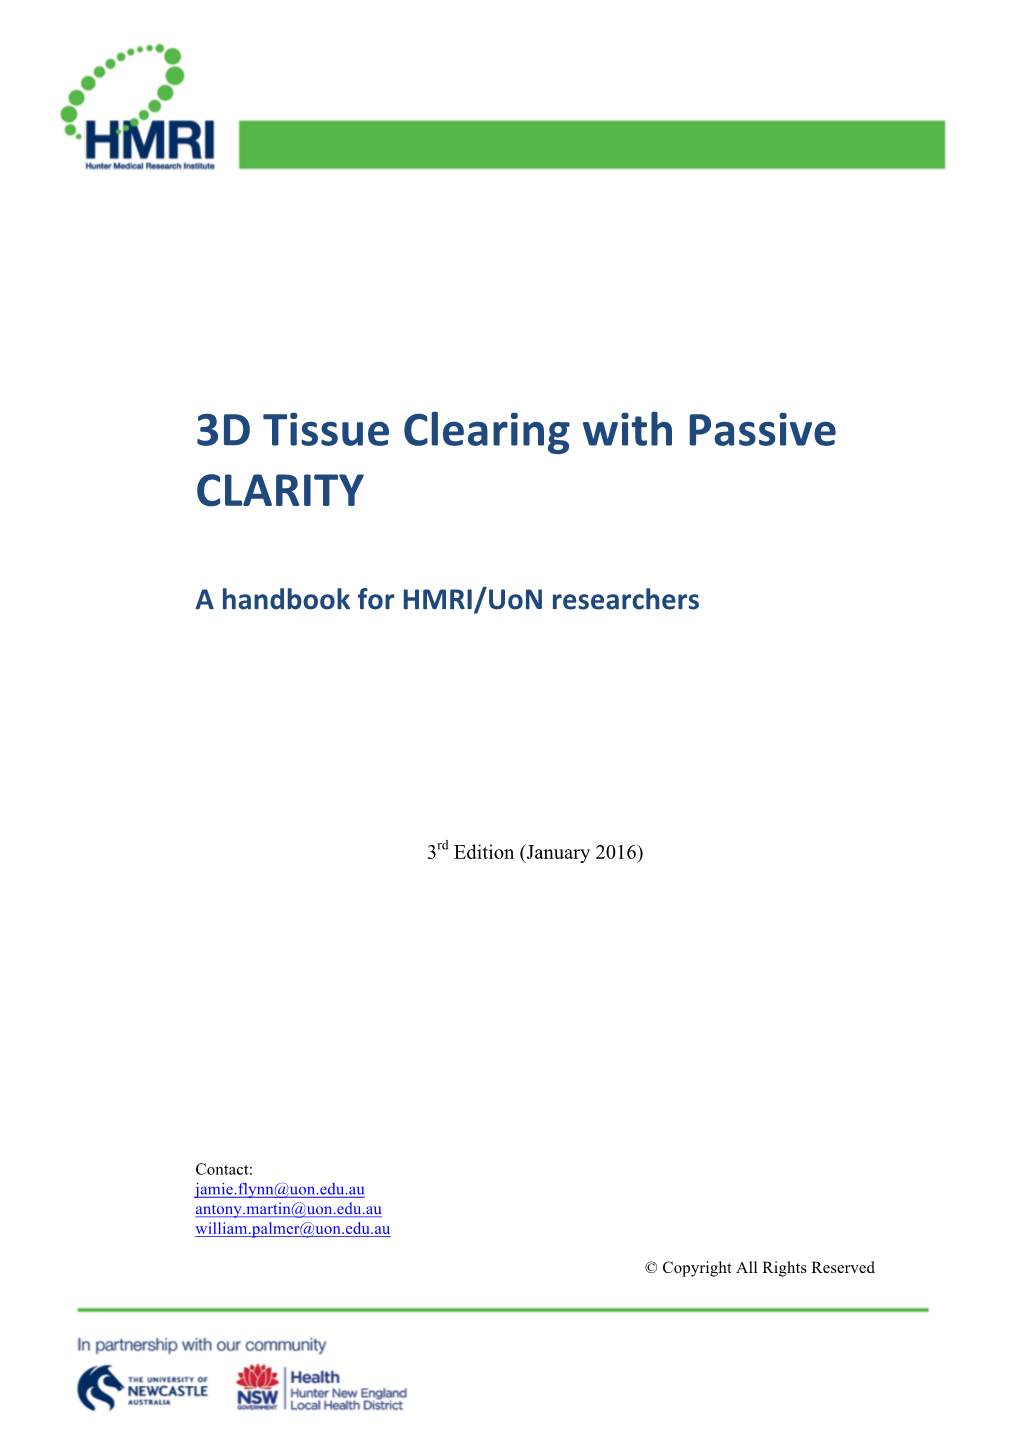 3D Tissue Clearing with Passive CLARITY